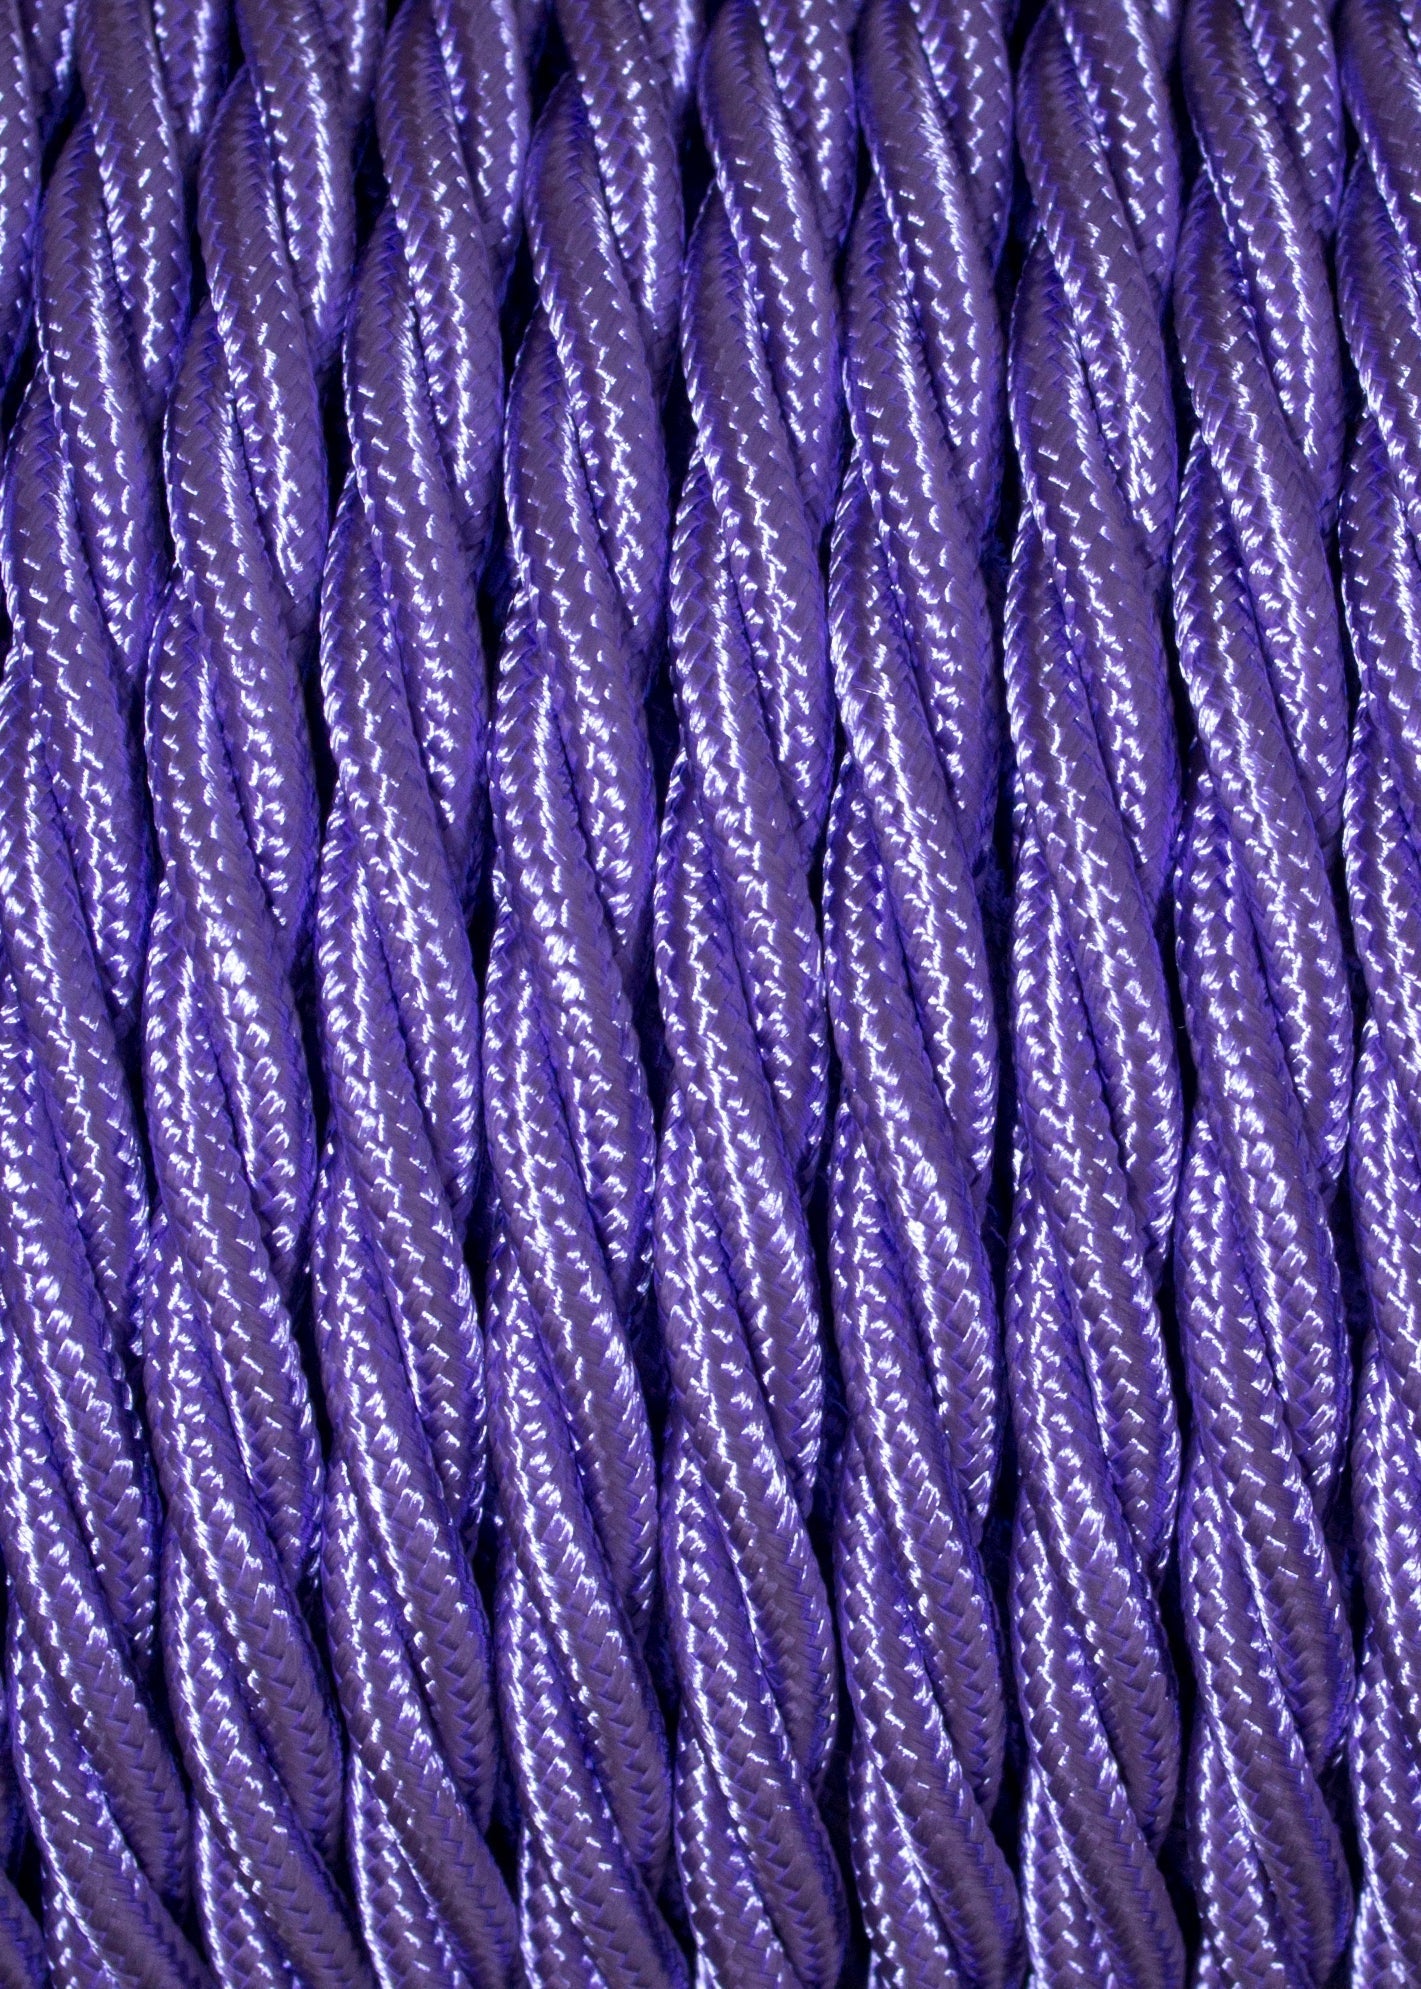 Violet + White - Lola's Leads Fabric Extension Cable